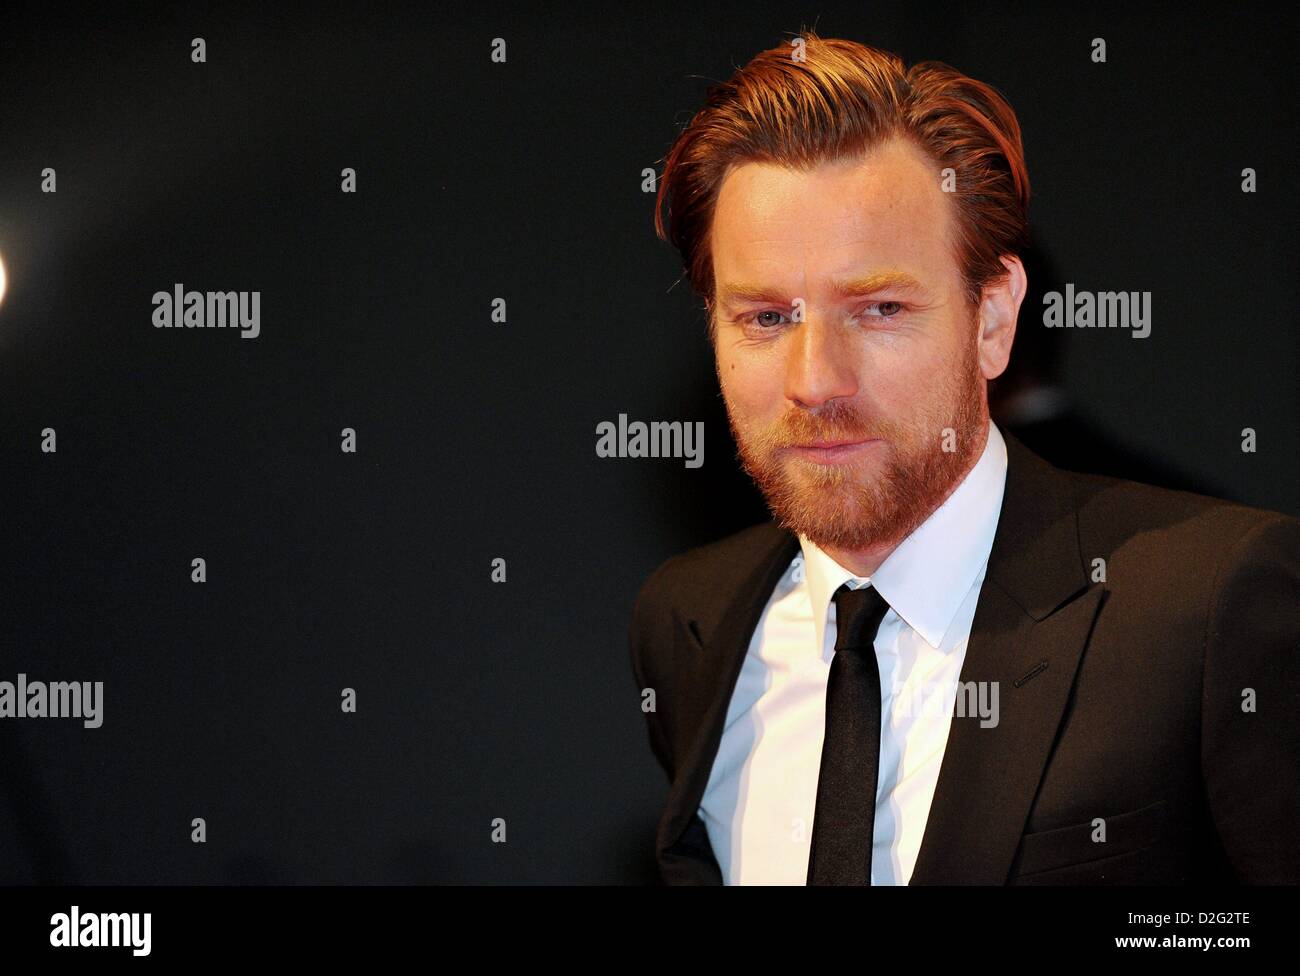 Geneva, Switzerland. 22nd January 2013. Scottish Actor Ewan Mc Gregor attends at IWC Race Night Dinner in Geneva.The swiss watch manufactur celebrated its new Ingenieur collection as well as the partnershipwith the Mercedes AMG Petronas Formula One Team. Photo: Frank May/picture alliance/ Alamy Live News Stock Photo